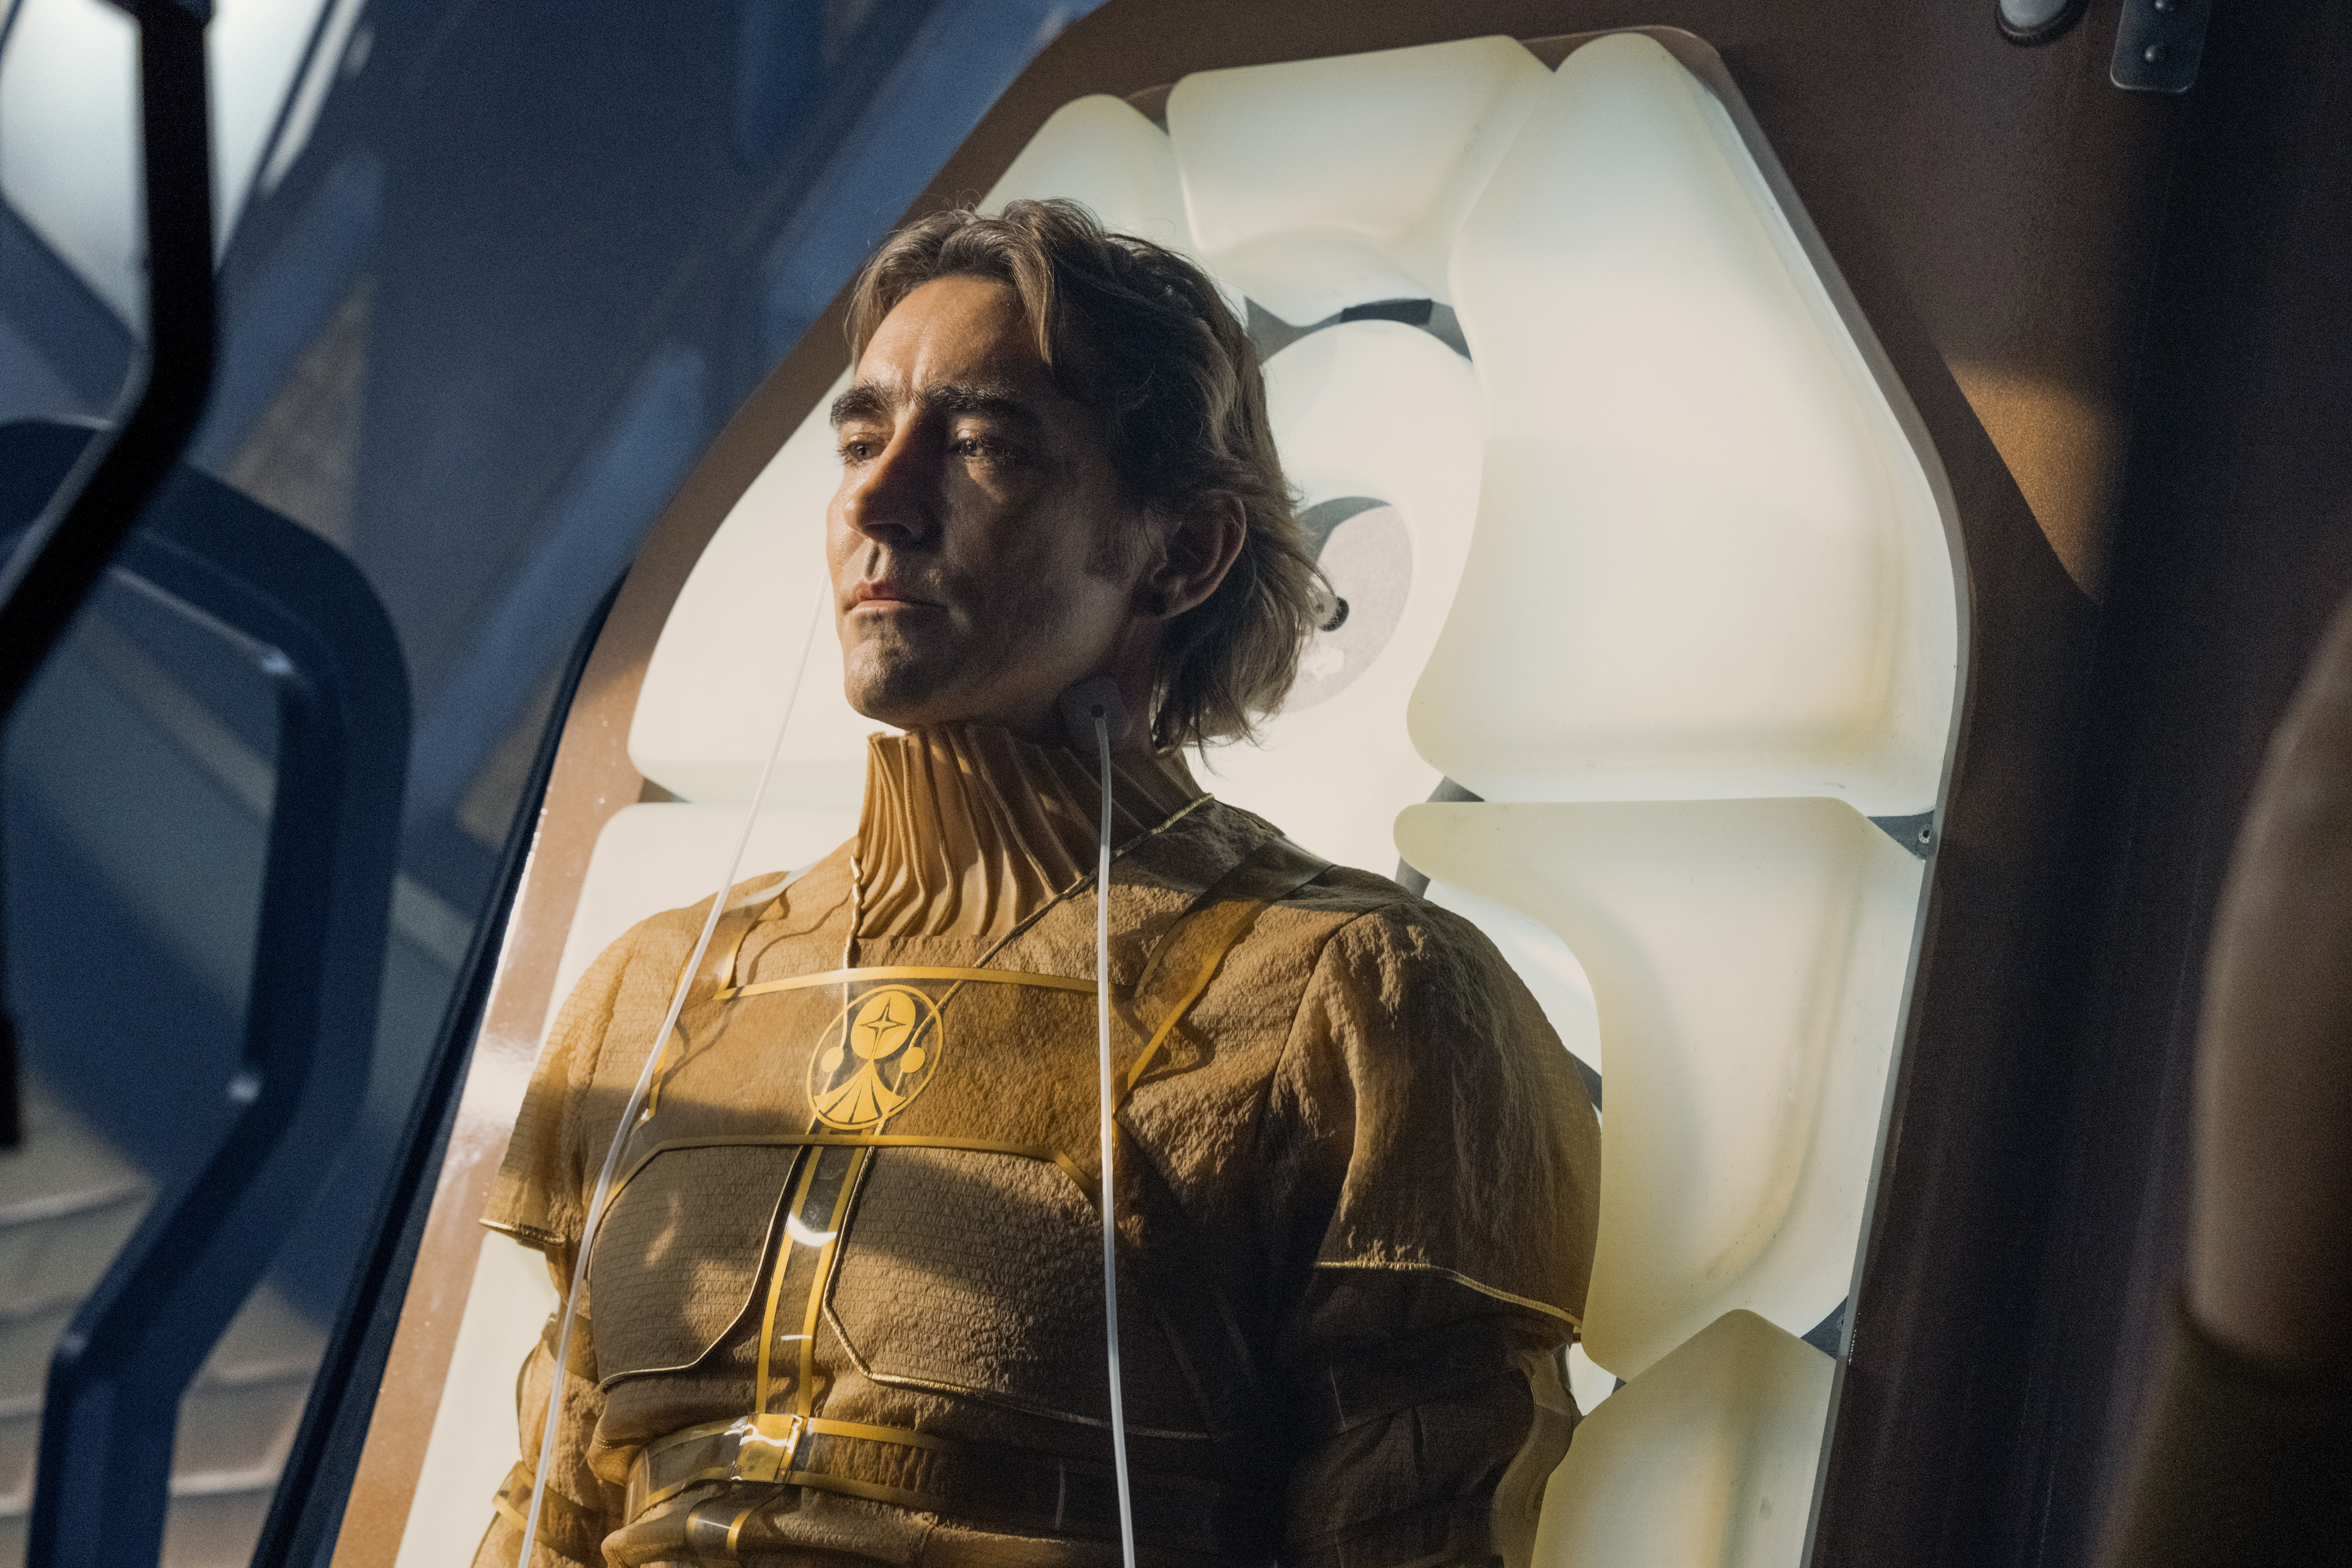 Foundation 2x08 Lee Pace as Brother Day